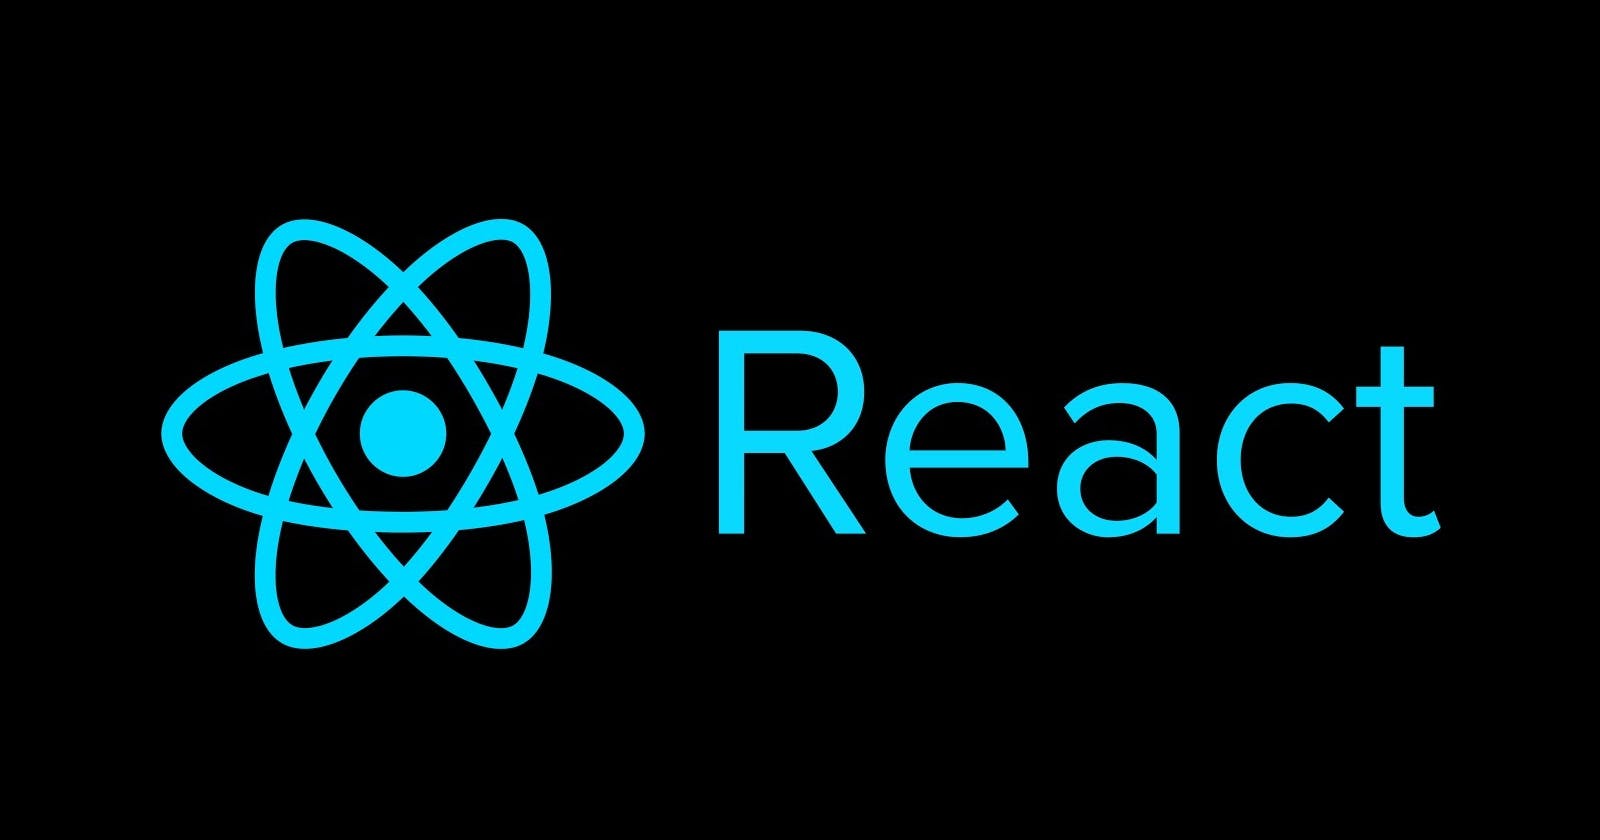 Episode 1: Welcome to React